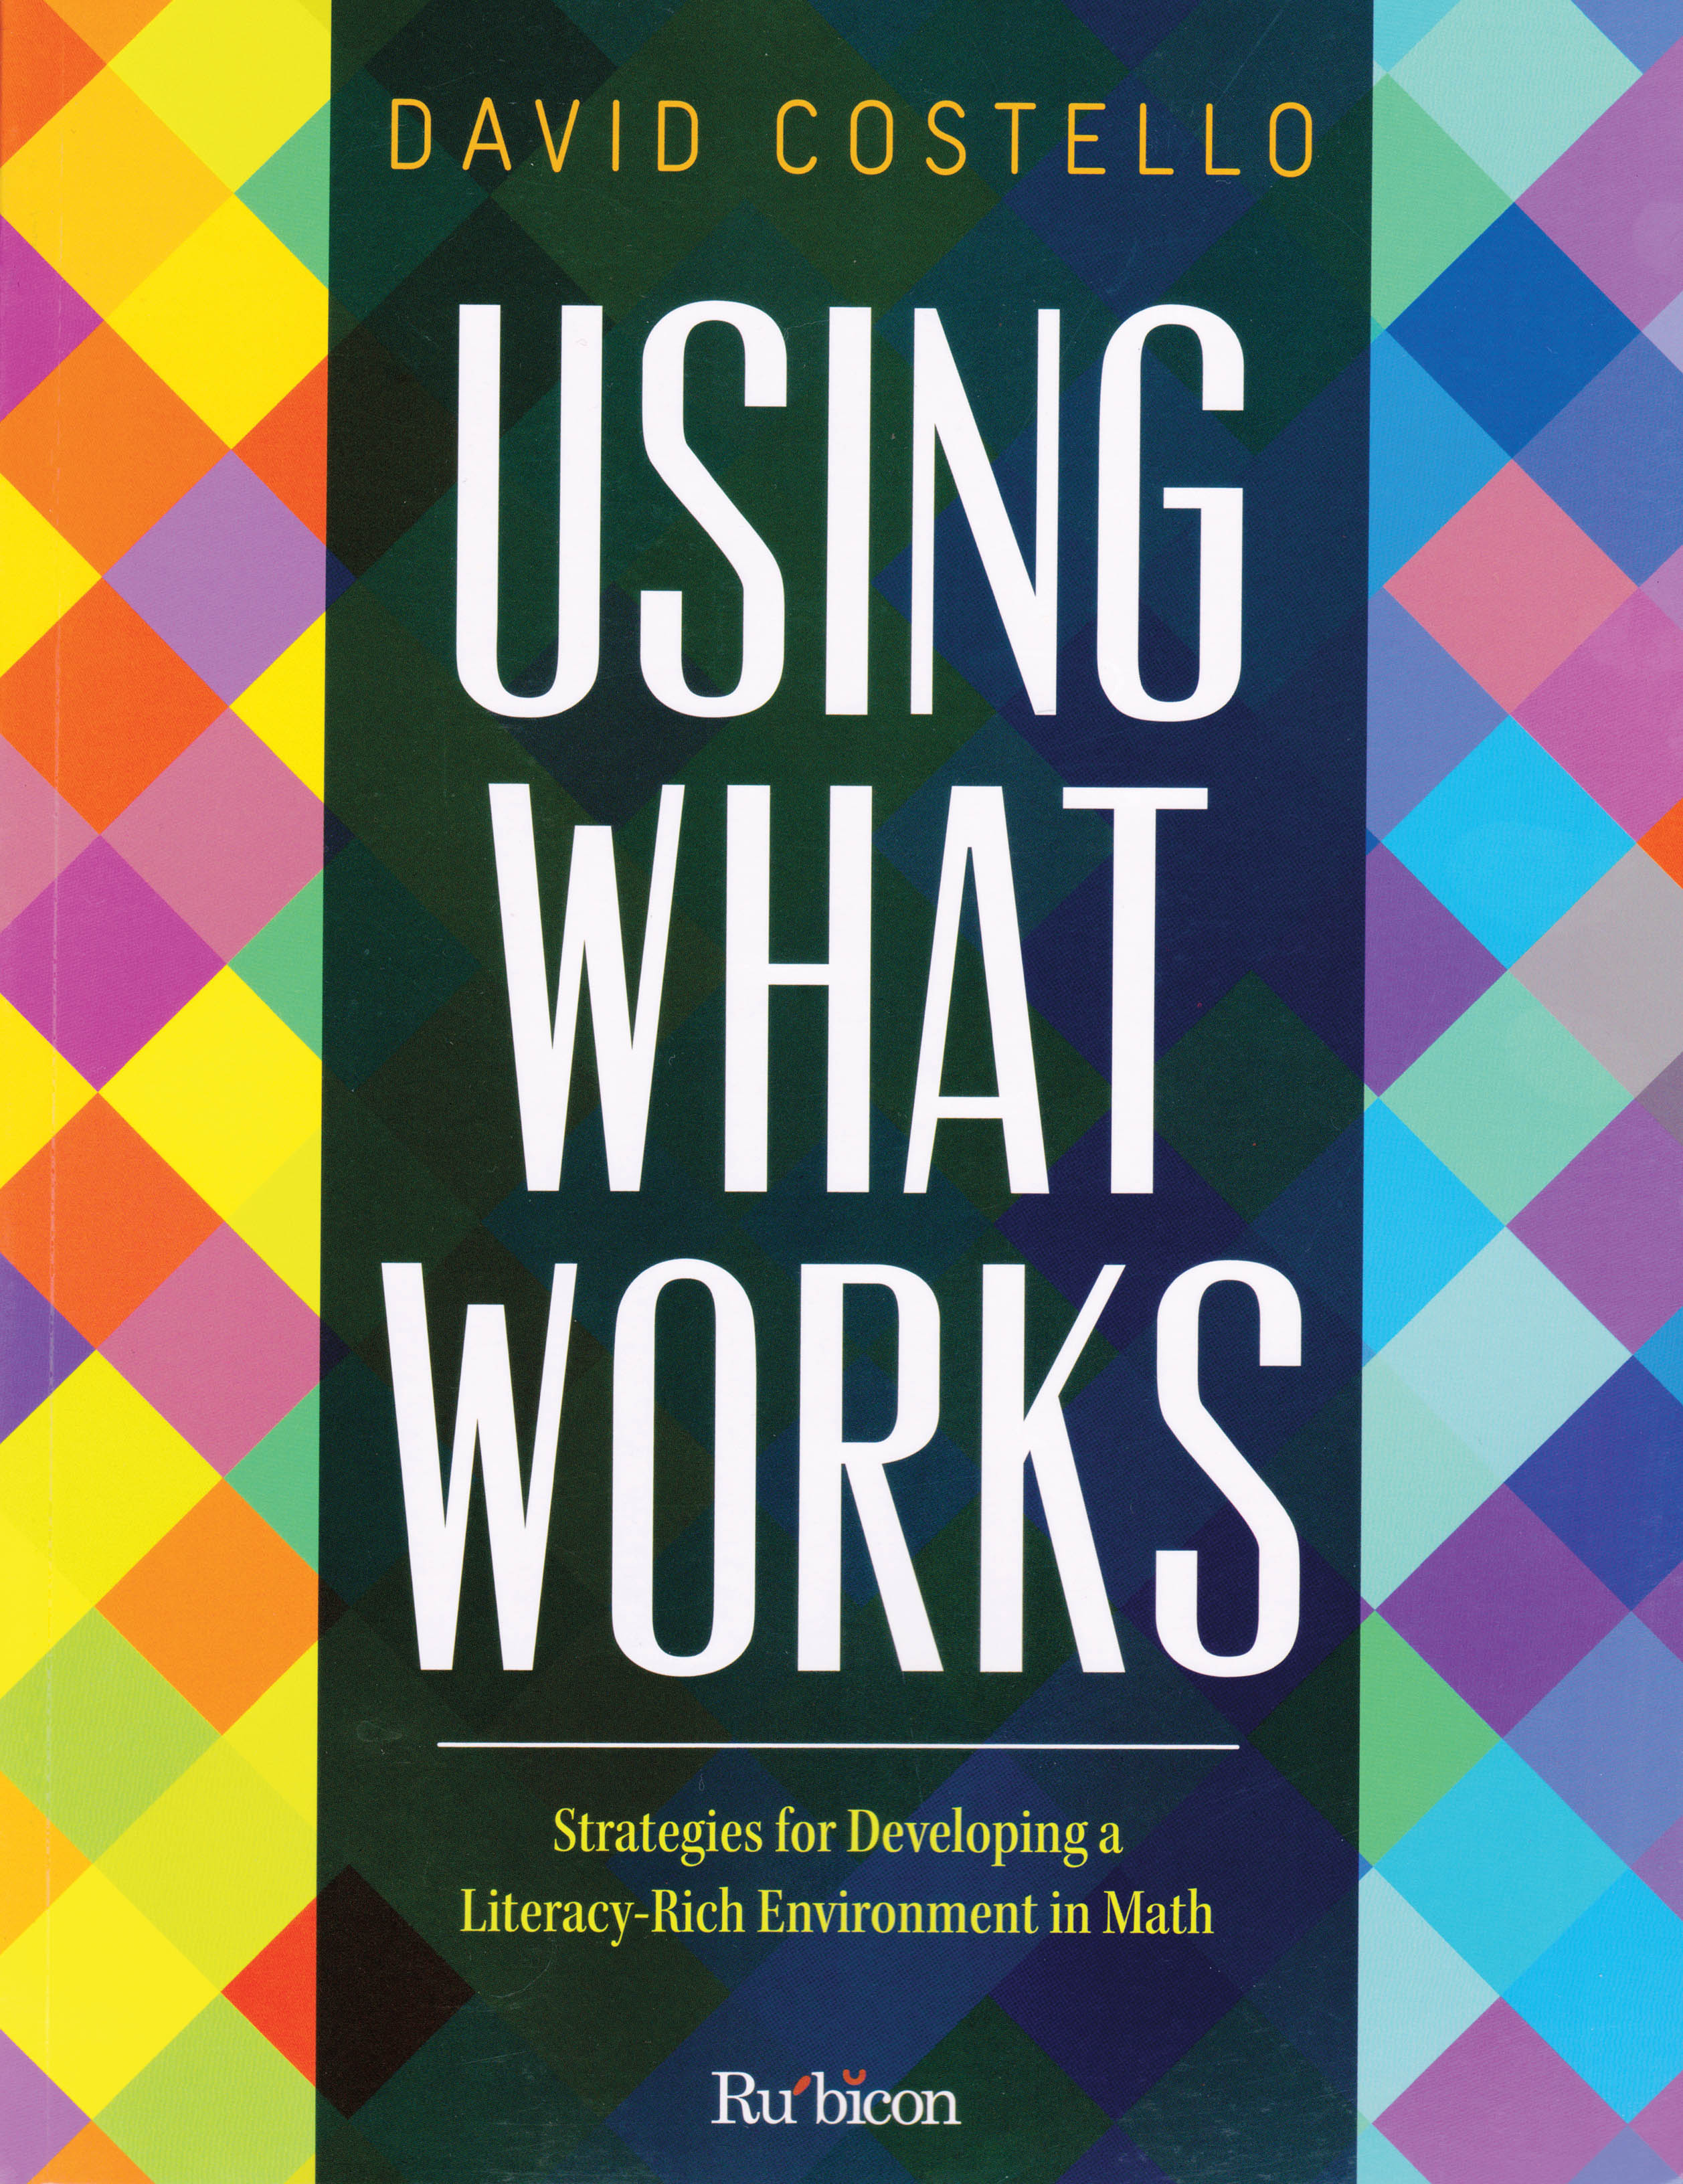 'Using What Works' book cover